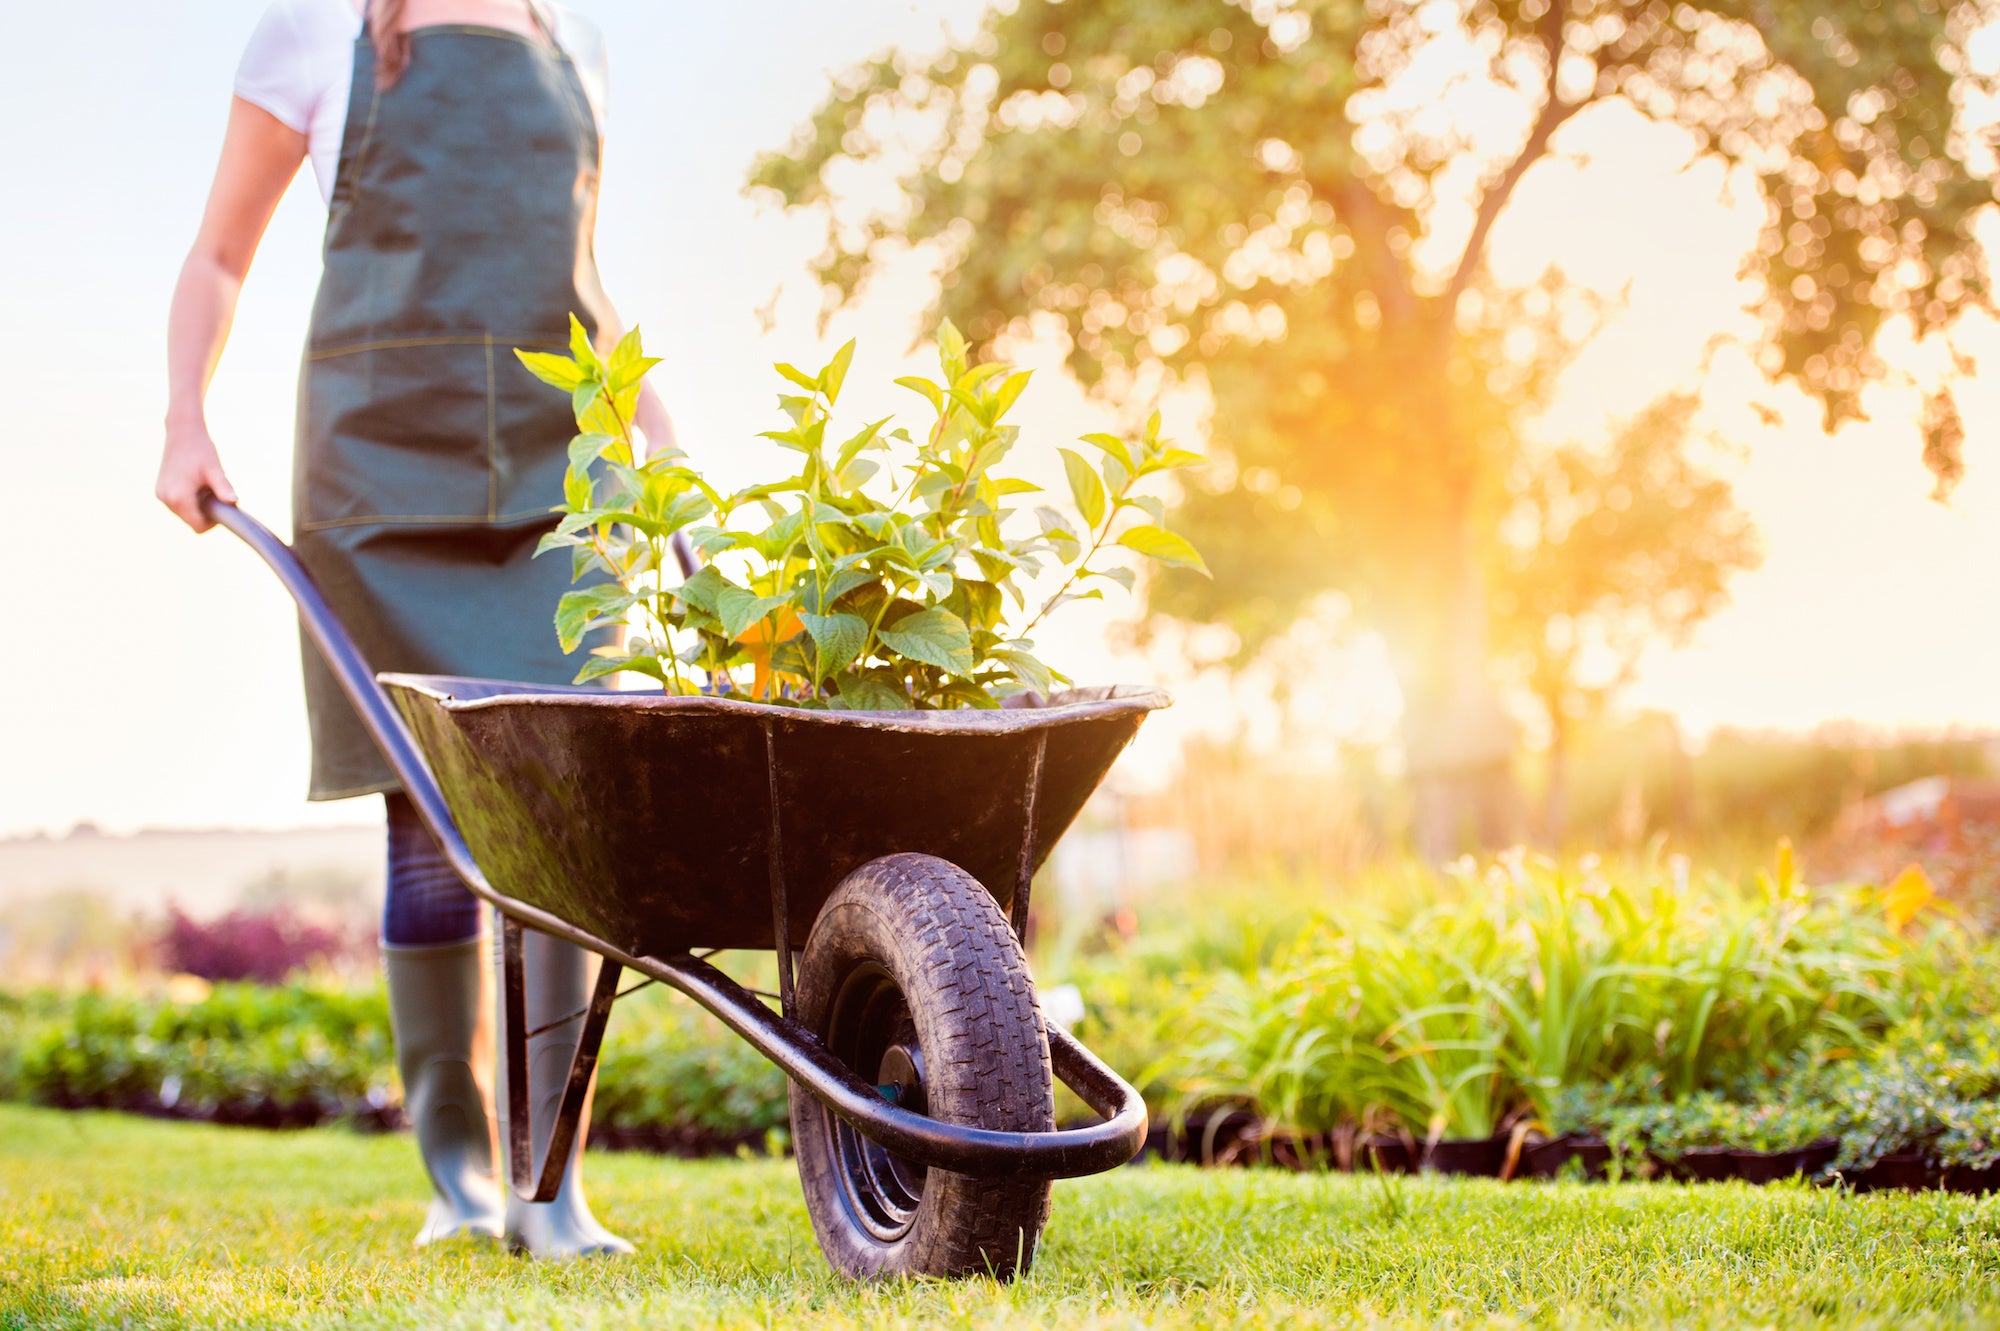 6 Gardening Tools You Can Get for Back Pain